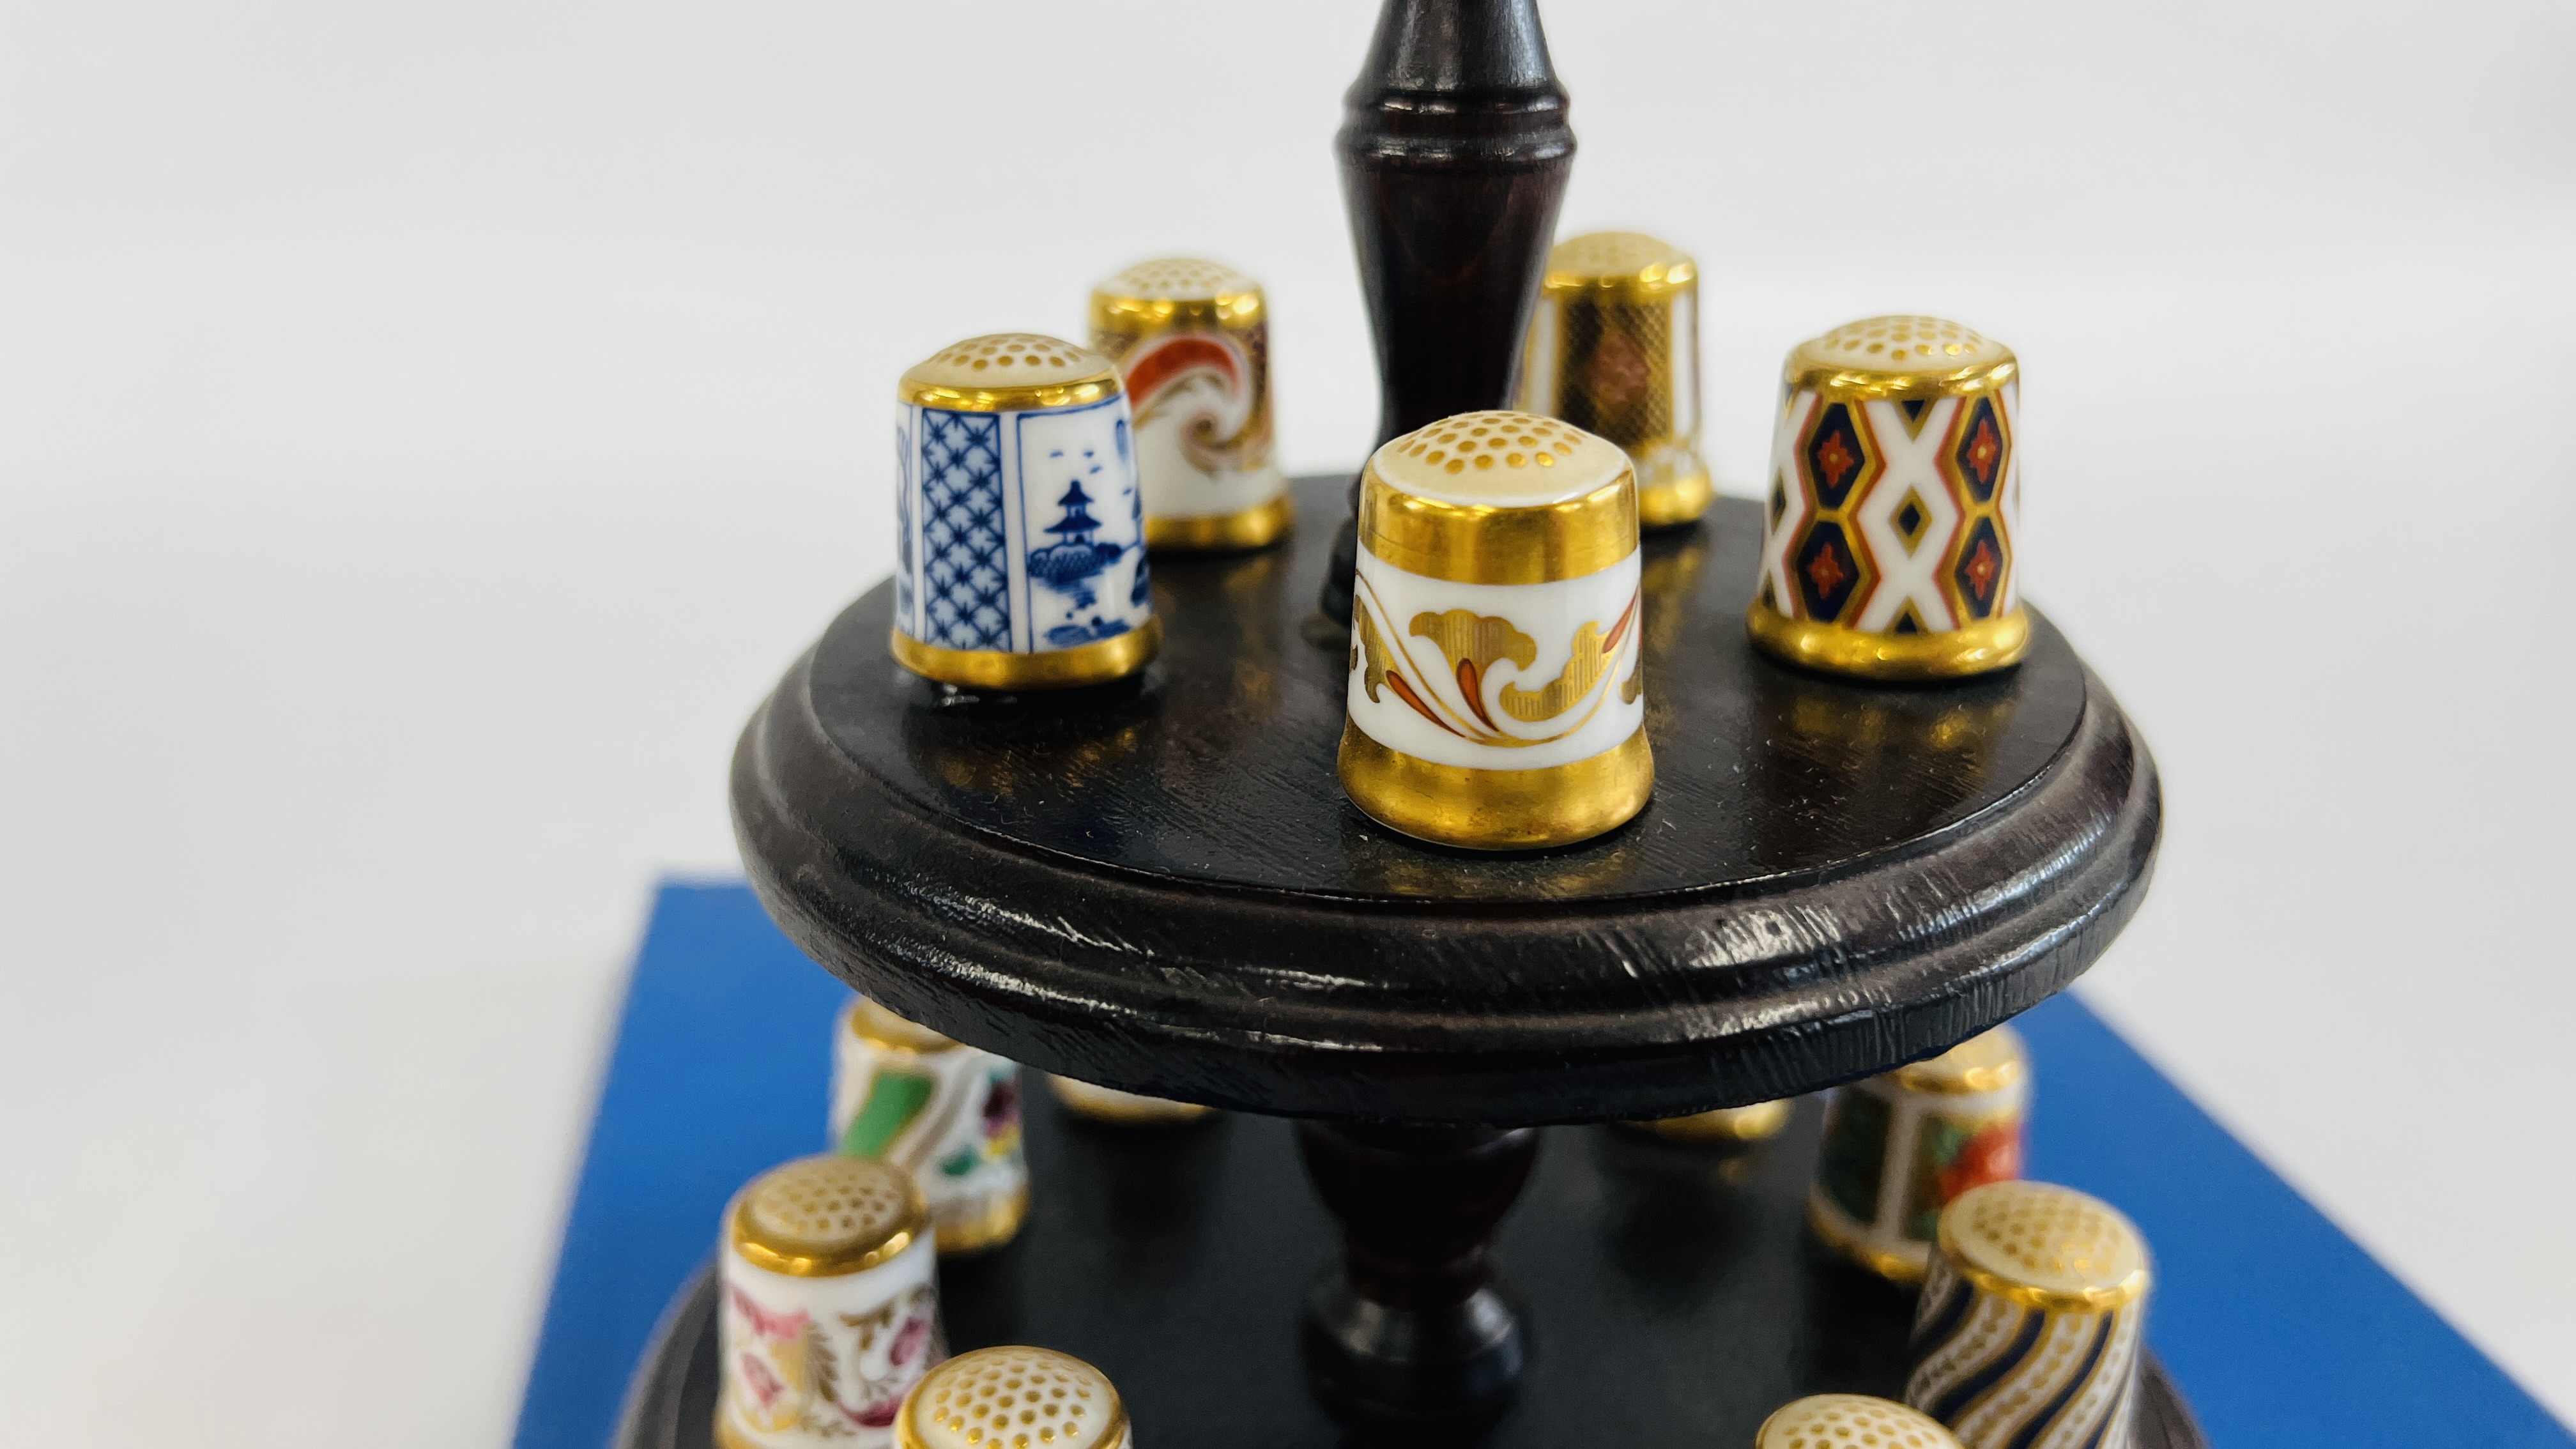 A COLLECTION OF 15 ROYAL CROWN DERBY THIMBLES ON A THIMBLE STAND WITH A PIN CUSHION INSET ALONG - Image 5 of 9